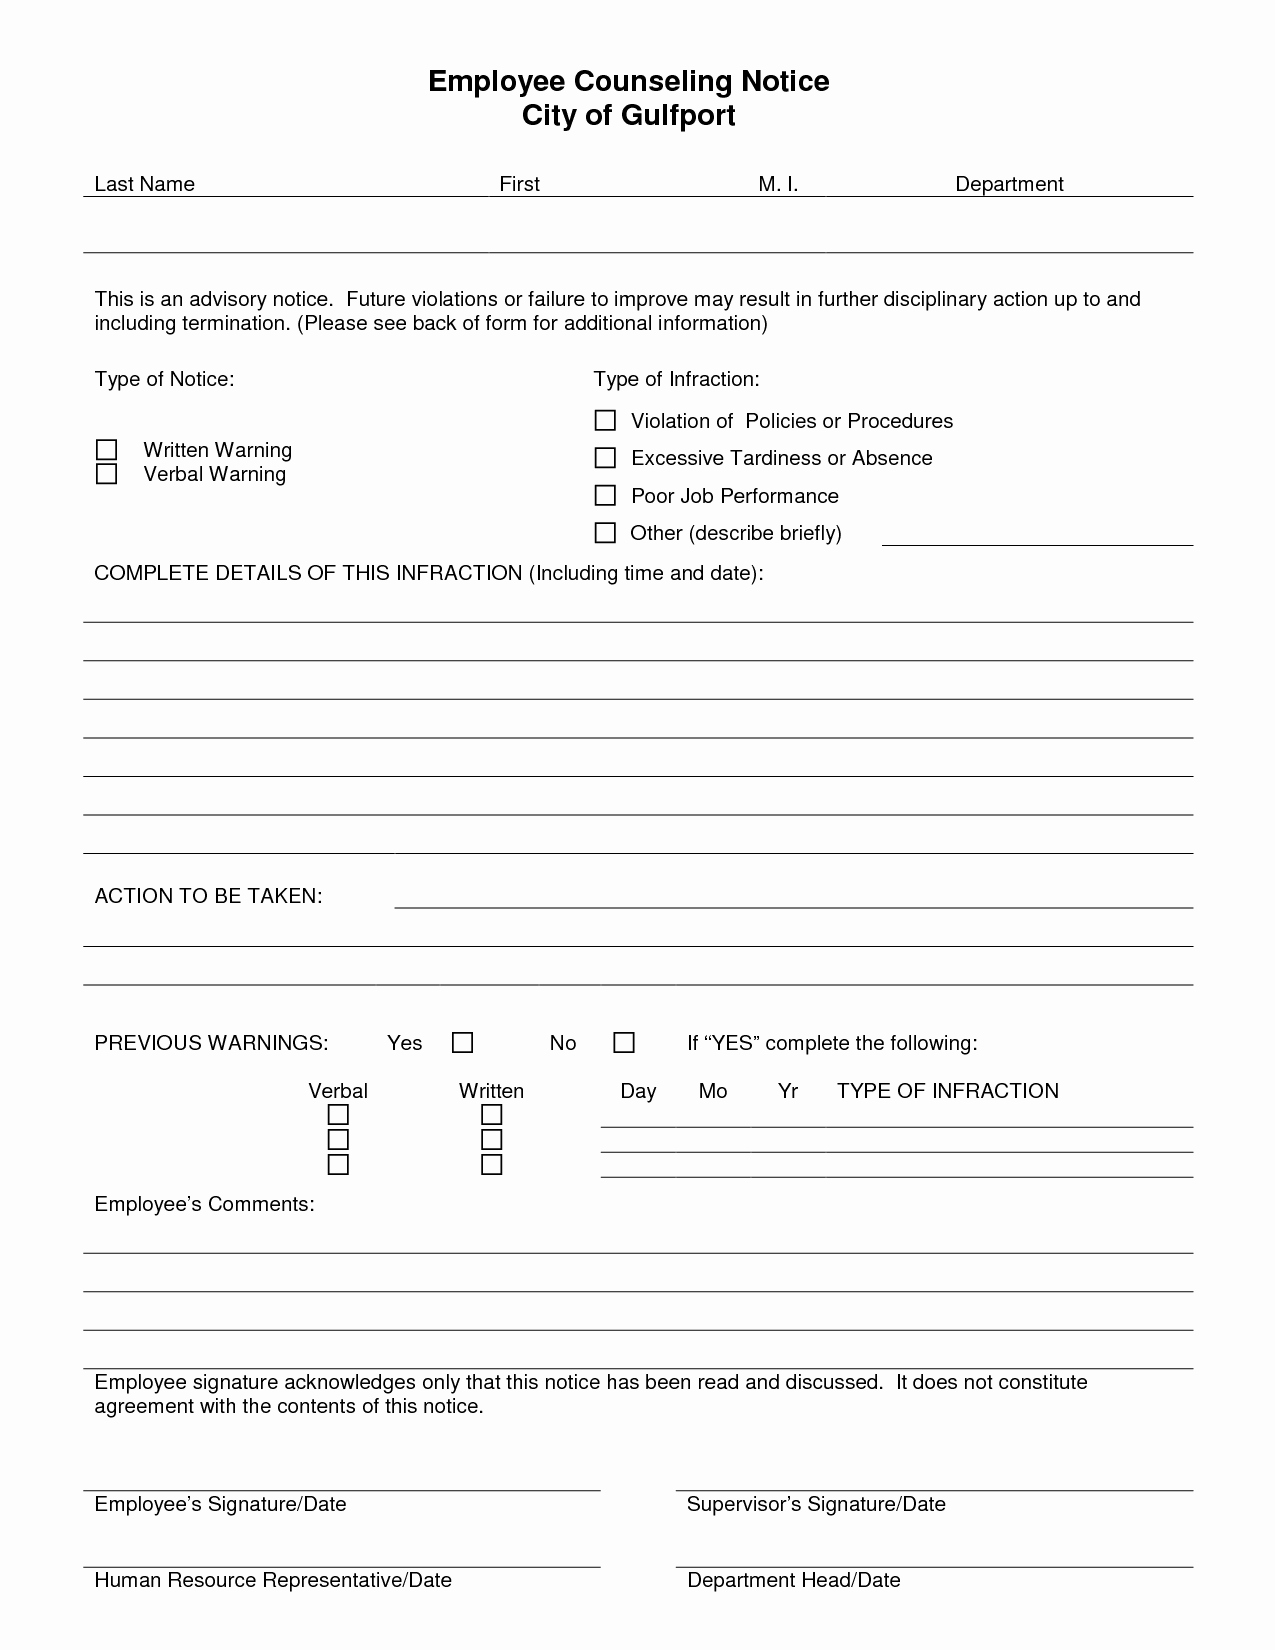 Employee Counseling form Template Inspirational Verbal Counseling form Template